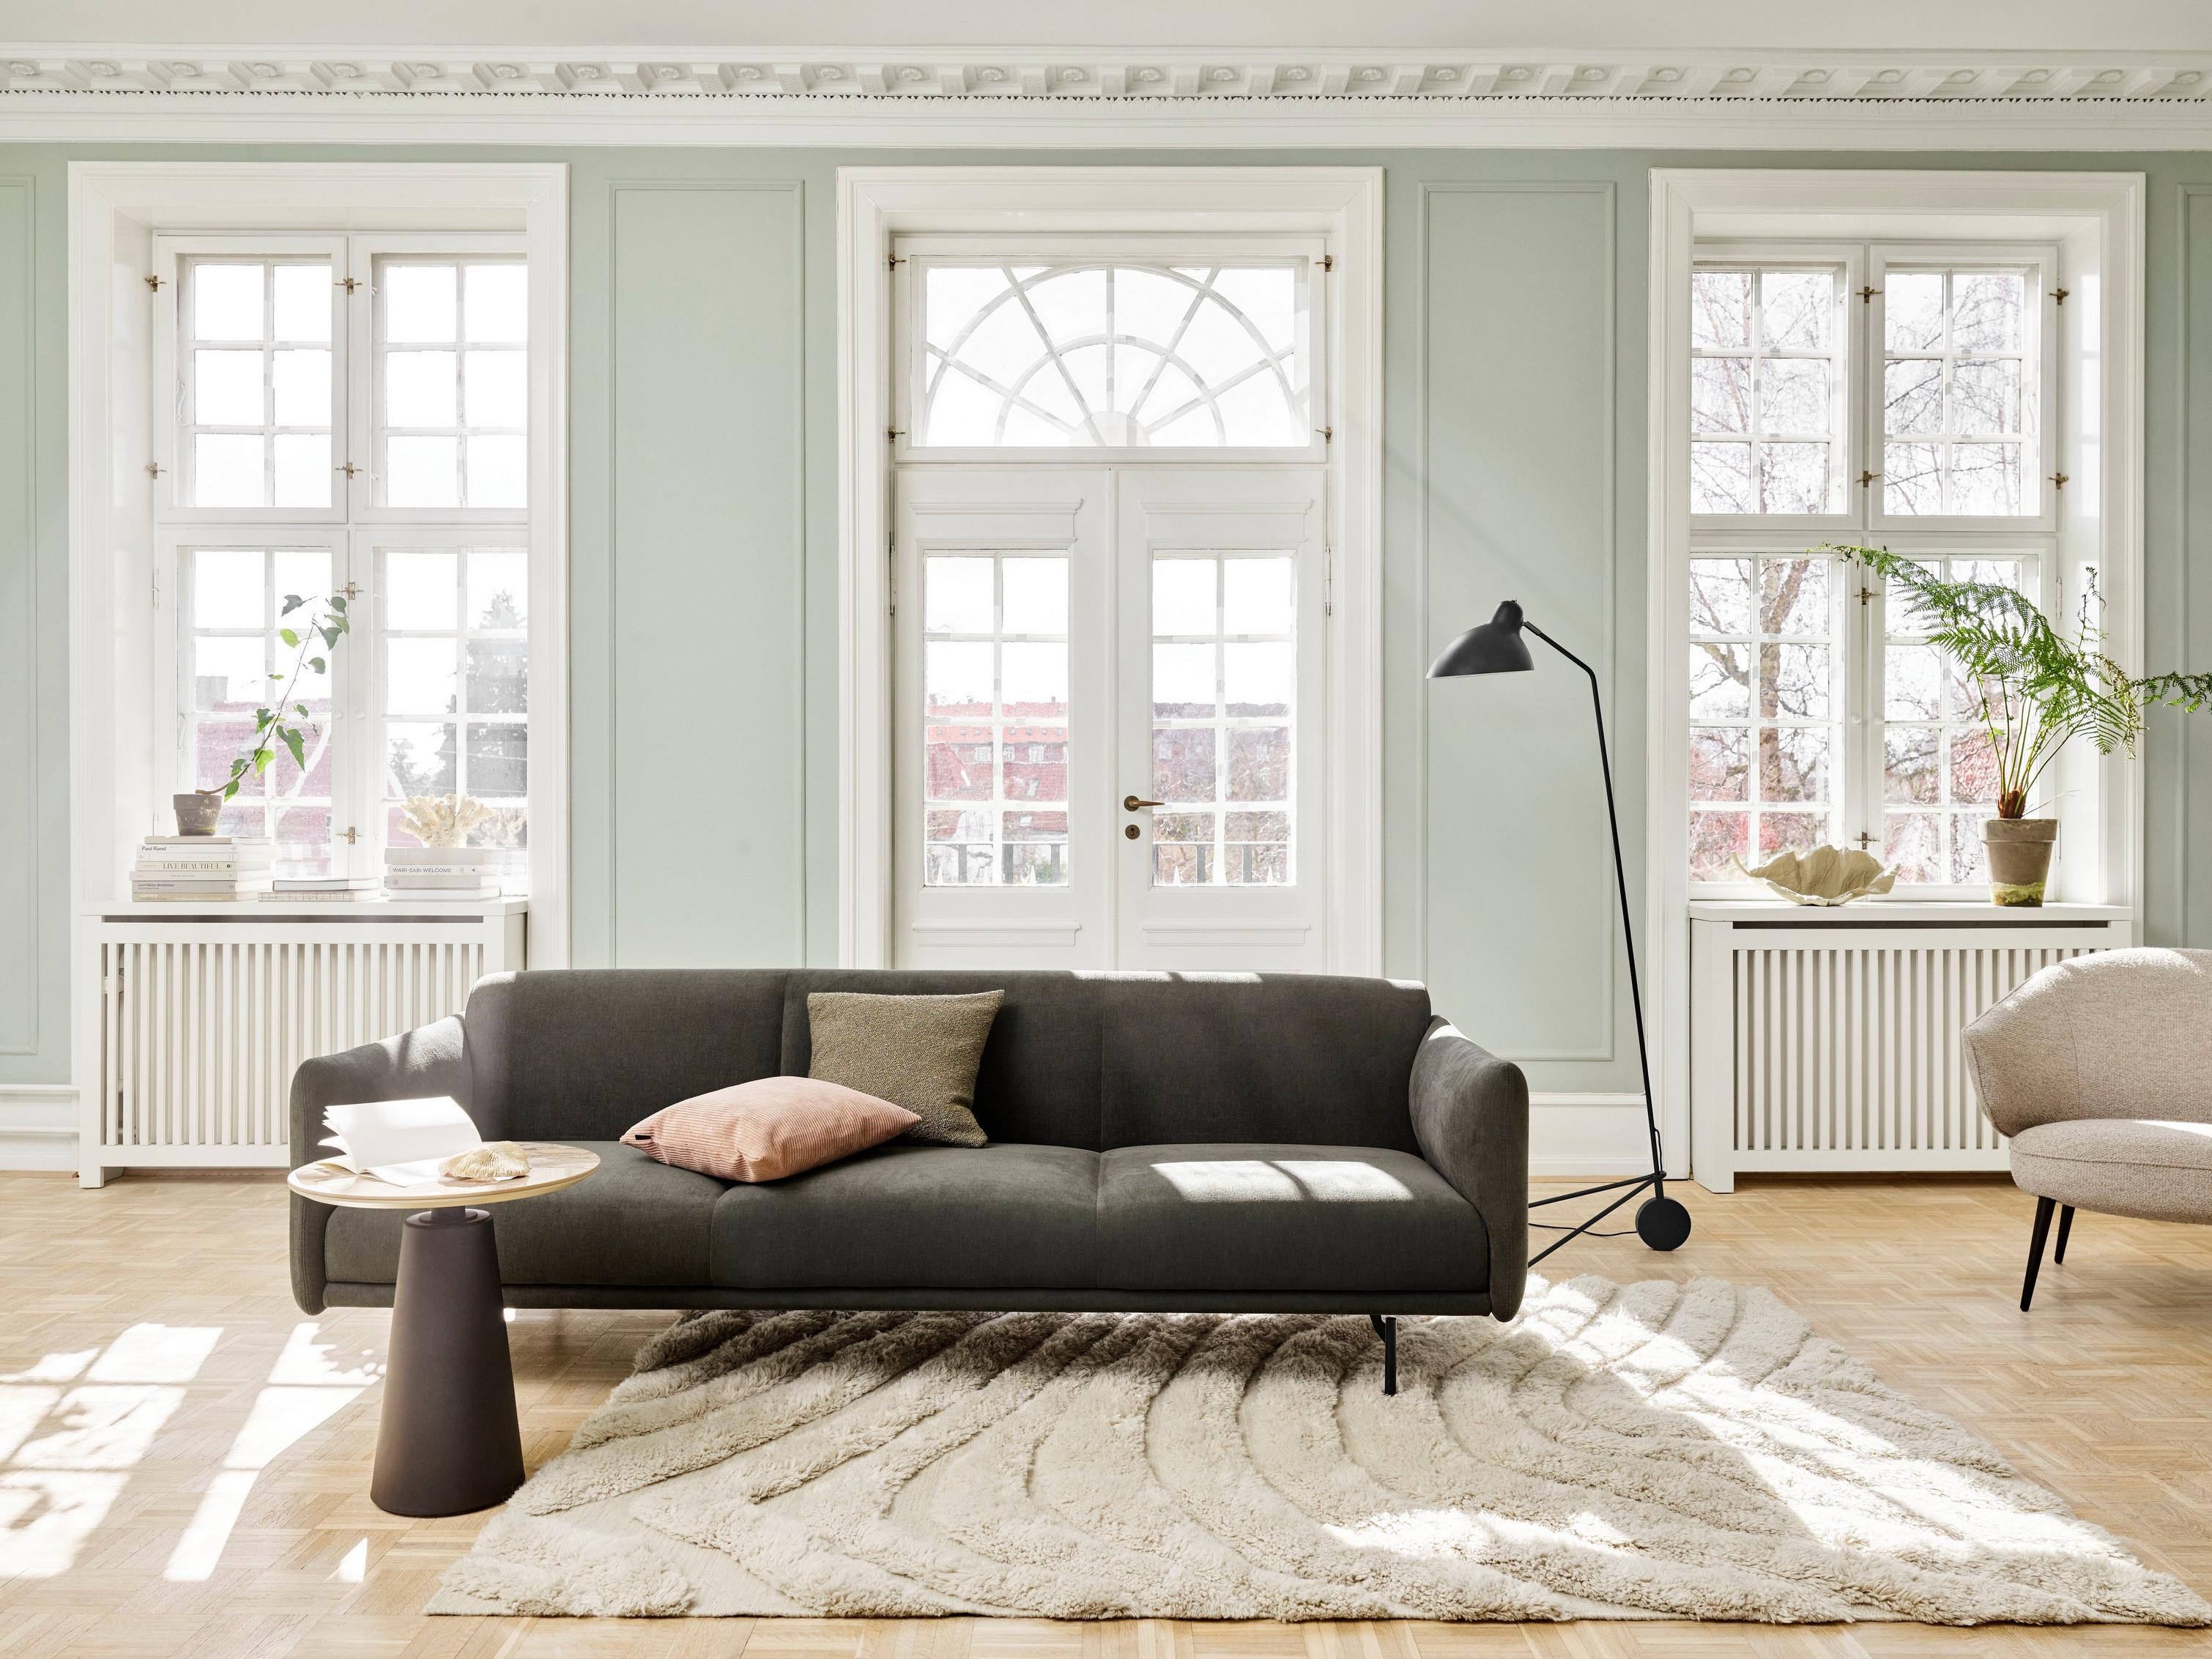 A calm living space with the Berne sofa, Madrid side table and Demand floor lamp.